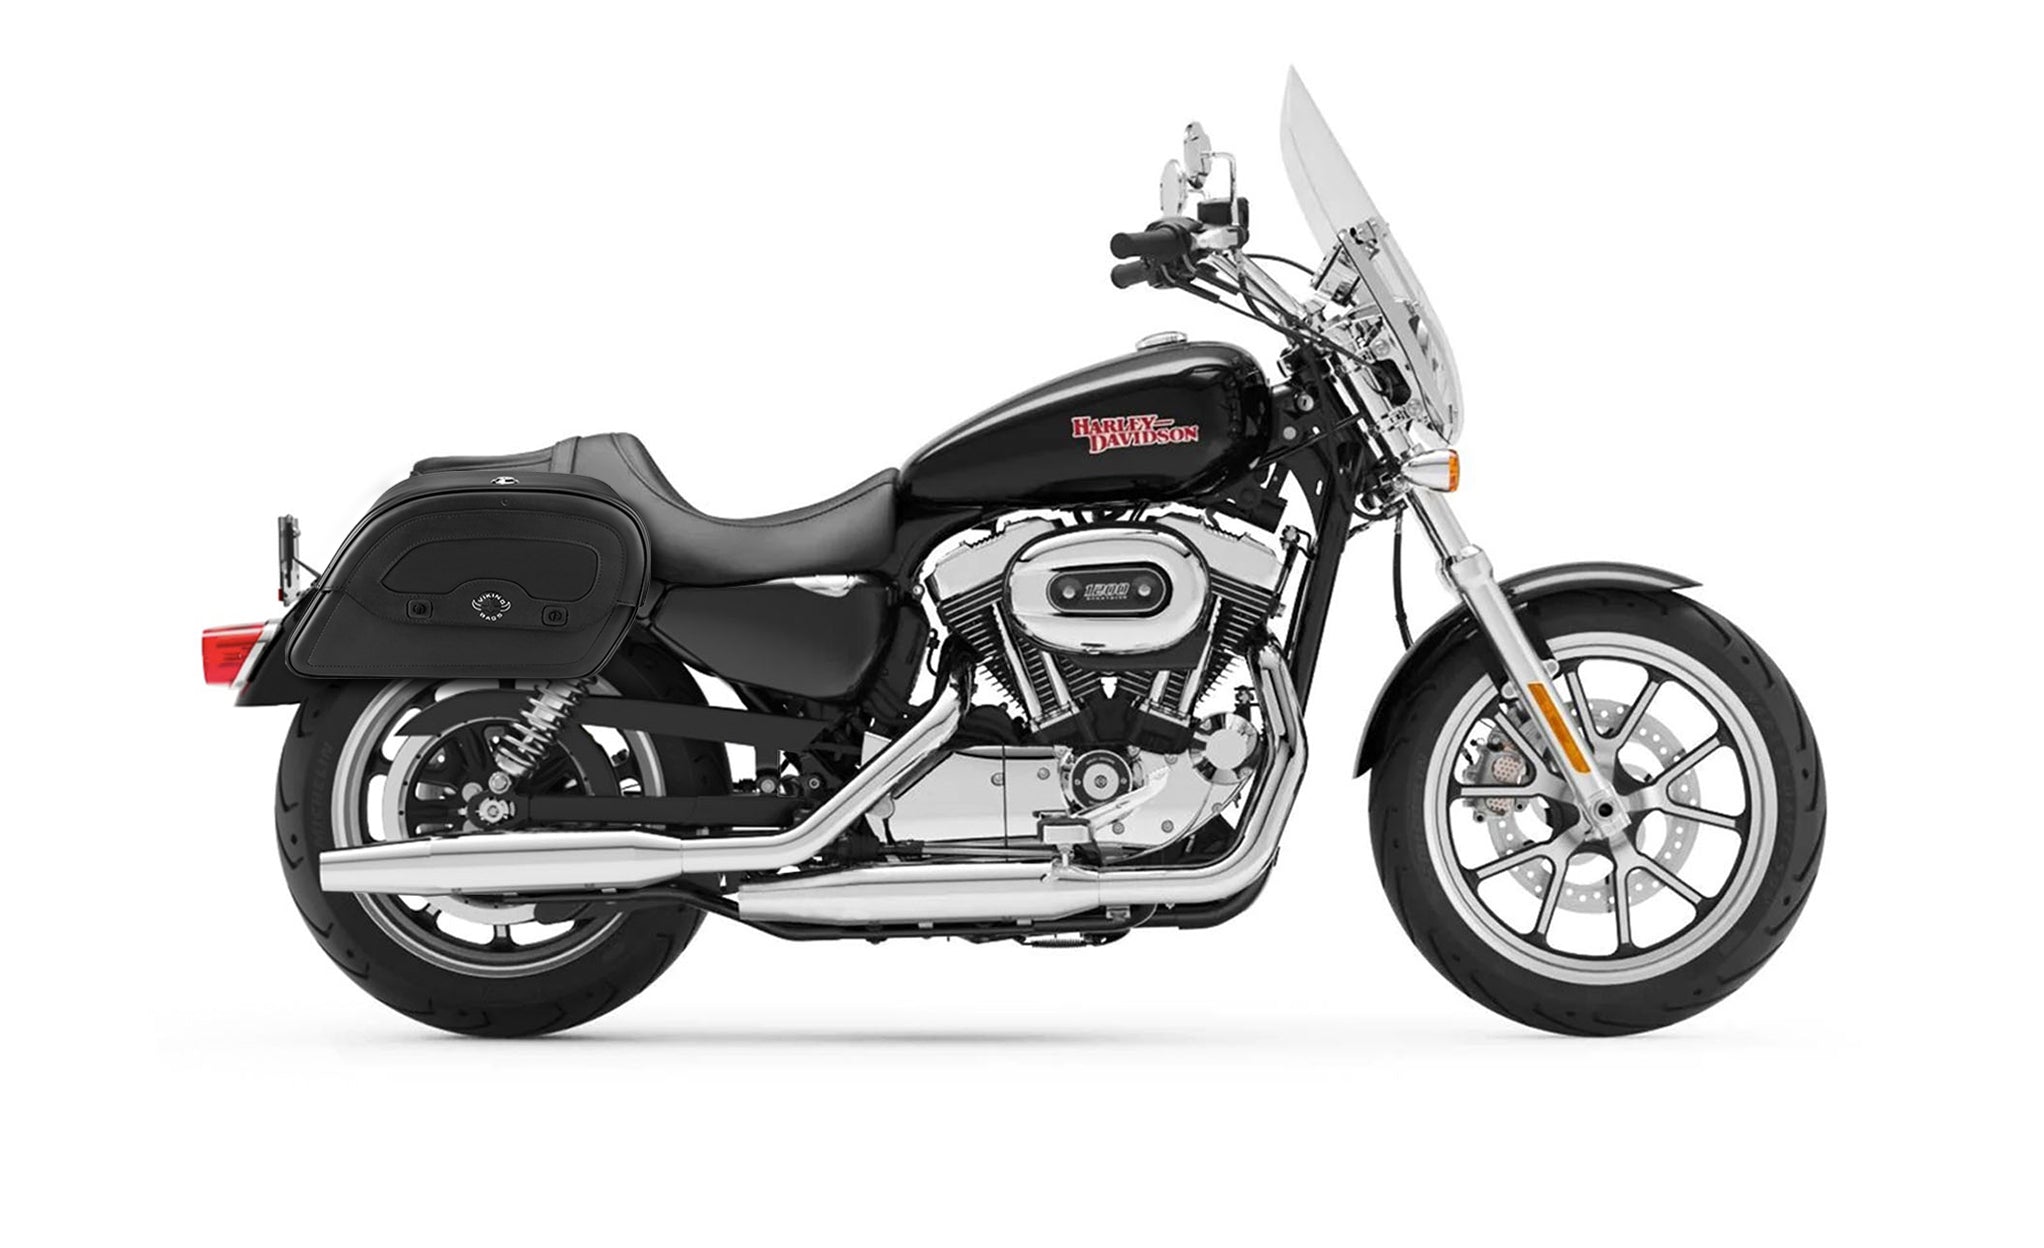 22L - Warrior Medium Quick-Mount Motorcycle Saddlebags For Harley Sportster Super Low 1200T @expand